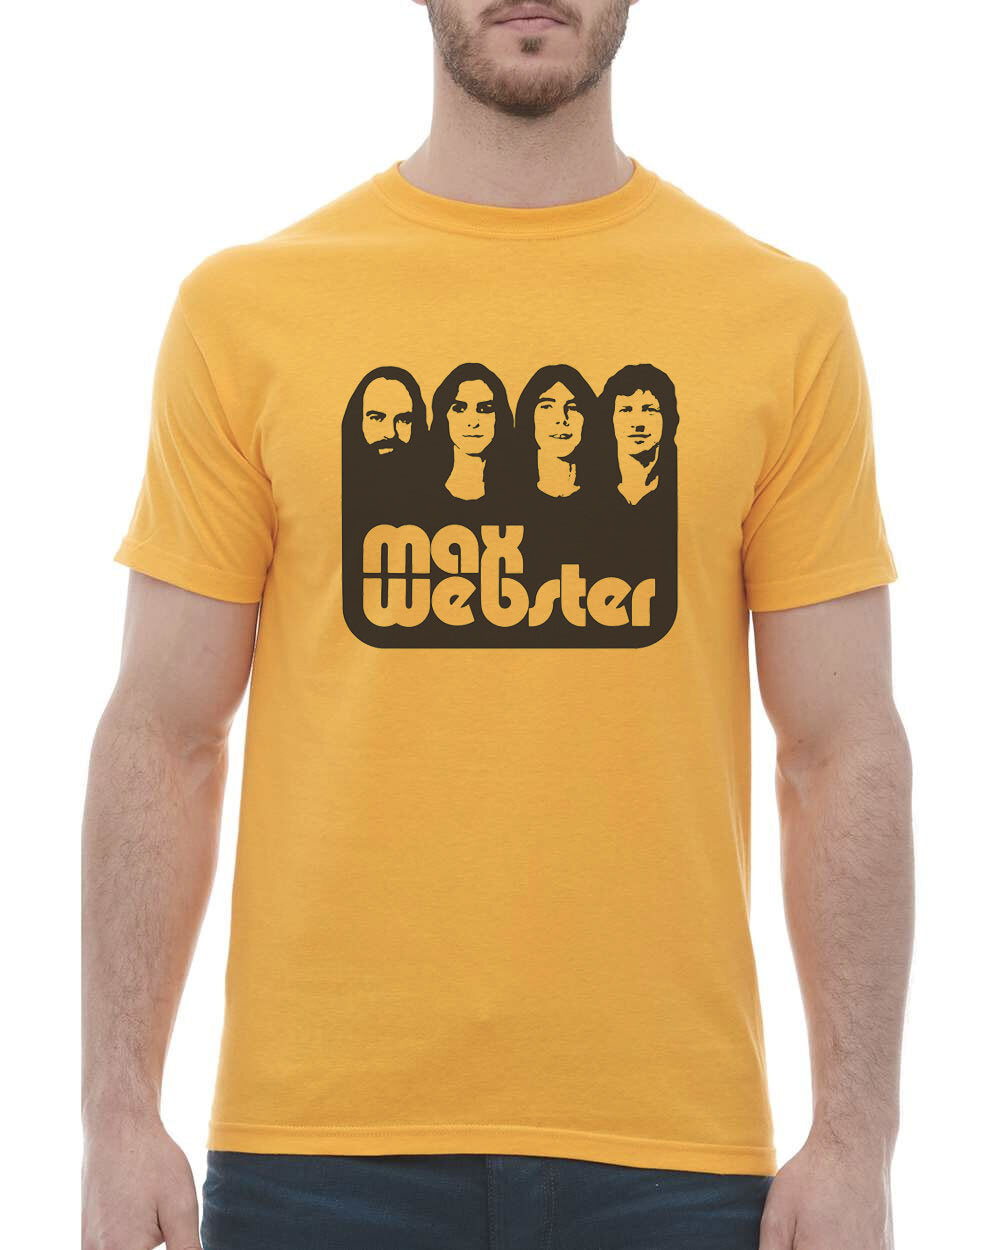 Vintage Max Webster T-shirt - Yellow